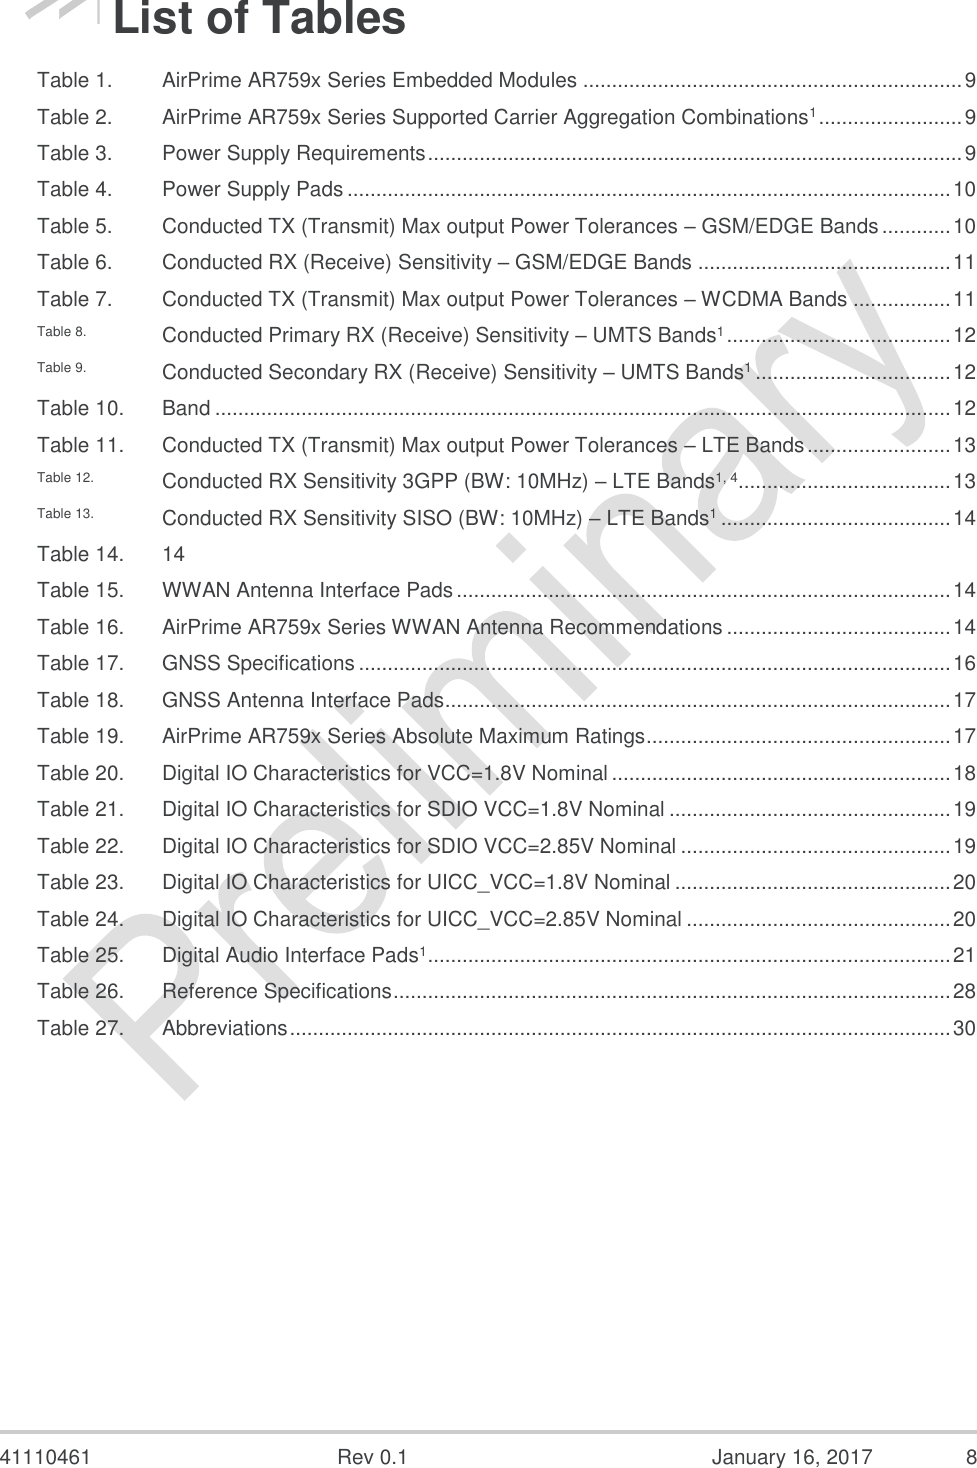  41110461  Rev 0.1  January 16, 2017  8 List of Tables Table 1. AirPrime AR759x Series Embedded Modules .................................................................. 9 Table 2. AirPrime AR759x Series Supported Carrier Aggregation Combinations1 ......................... 9 Table 3. Power Supply Requirements ............................................................................................. 9 Table 4. Power Supply Pads ......................................................................................................... 10 Table 5. Conducted TX (Transmit) Max output Power Tolerances – GSM/EDGE Bands ............ 10 Table 6. Conducted RX (Receive) Sensitivity – GSM/EDGE Bands ............................................ 11 Table 7. Conducted TX (Transmit) Max output Power Tolerances – WCDMA Bands ................. 11 Table 8. Conducted Primary RX (Receive) Sensitivity – UMTS Bands1 ....................................... 12 Table 9. Conducted Secondary RX (Receive) Sensitivity – UMTS Bands1 .................................. 12 Table 10. Band ................................................................................................................................ 12 Table 11. Conducted TX (Transmit) Max output Power Tolerances – LTE Bands ......................... 13 Table 12. Conducted RX Sensitivity 3GPP (BW: 10MHz) – LTE Bands1, 4..................................... 13 Table 13. Conducted RX Sensitivity SISO (BW: 10MHz) – LTE Bands1 ........................................ 14 Table 14.  14 Table 15. WWAN Antenna Interface Pads ...................................................................................... 14 Table 16. AirPrime AR759x Series WWAN Antenna Recommendations ....................................... 14 Table 17. GNSS Specifications ....................................................................................................... 16 Table 18. GNSS Antenna Interface Pads ........................................................................................ 17 Table 19. AirPrime AR759x Series Absolute Maximum Ratings..................................................... 17 Table 20. Digital IO Characteristics for VCC=1.8V Nominal ........................................................... 18 Table 21. Digital IO Characteristics for SDIO VCC=1.8V Nominal ................................................. 19 Table 22. Digital IO Characteristics for SDIO VCC=2.85V Nominal ............................................... 19 Table 23. Digital IO Characteristics for UICC_VCC=1.8V Nominal ................................................ 20 Table 24. Digital IO Characteristics for UICC_VCC=2.85V Nominal .............................................. 20 Table 25. Digital Audio Interface Pads1 ........................................................................................... 21 Table 26. Reference Specifications ................................................................................................. 28 Table 27. Abbreviations ................................................................................................................... 30  